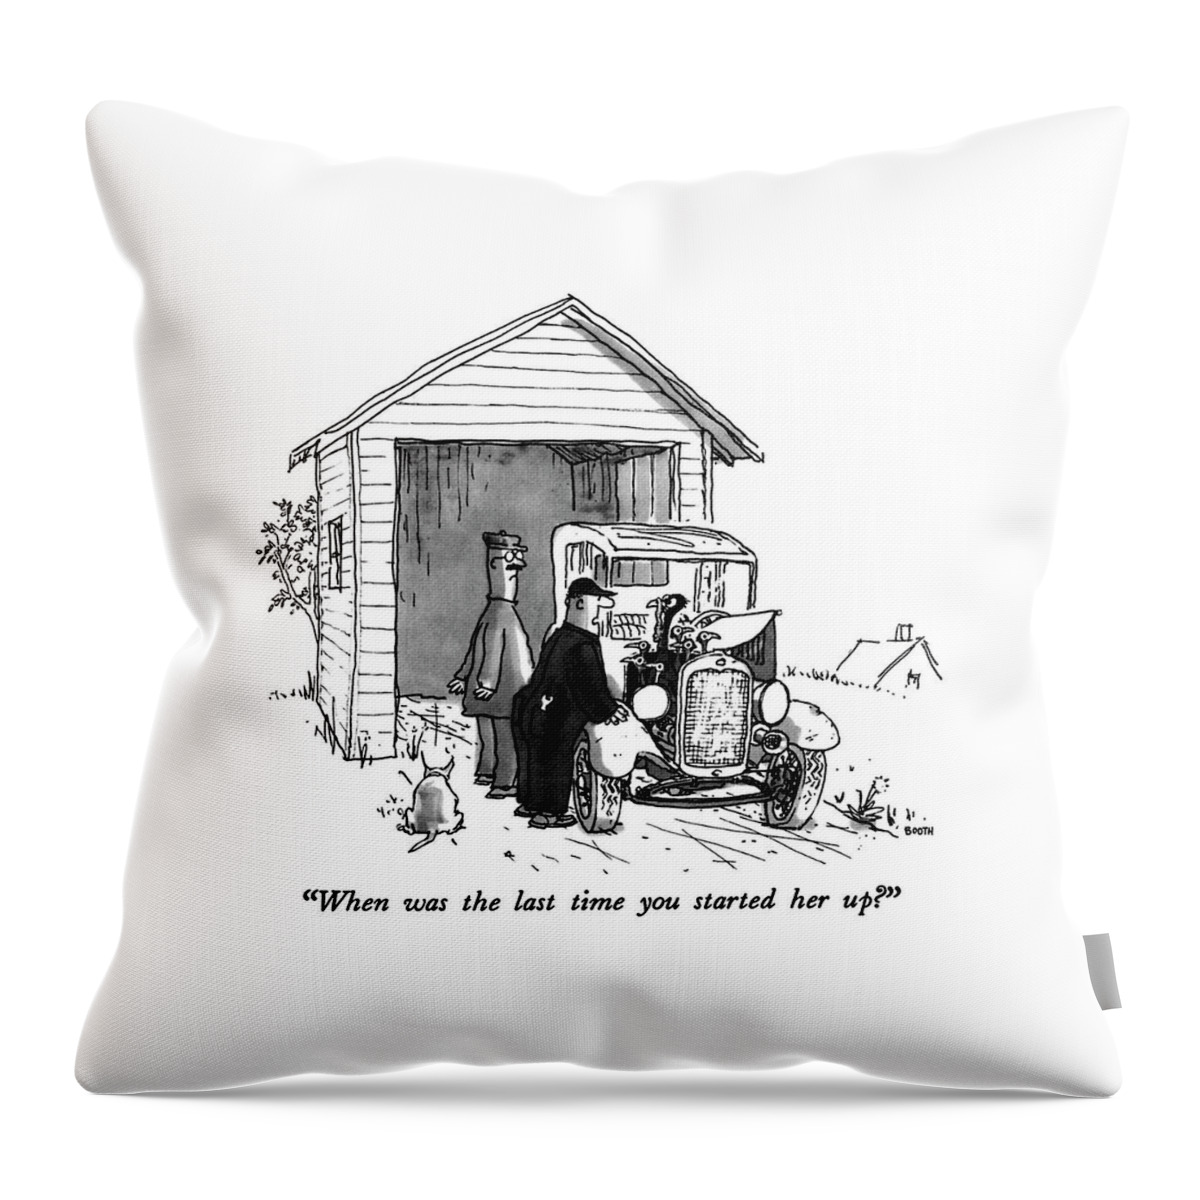 When Was The Last Time You Started Her Up? Throw Pillow